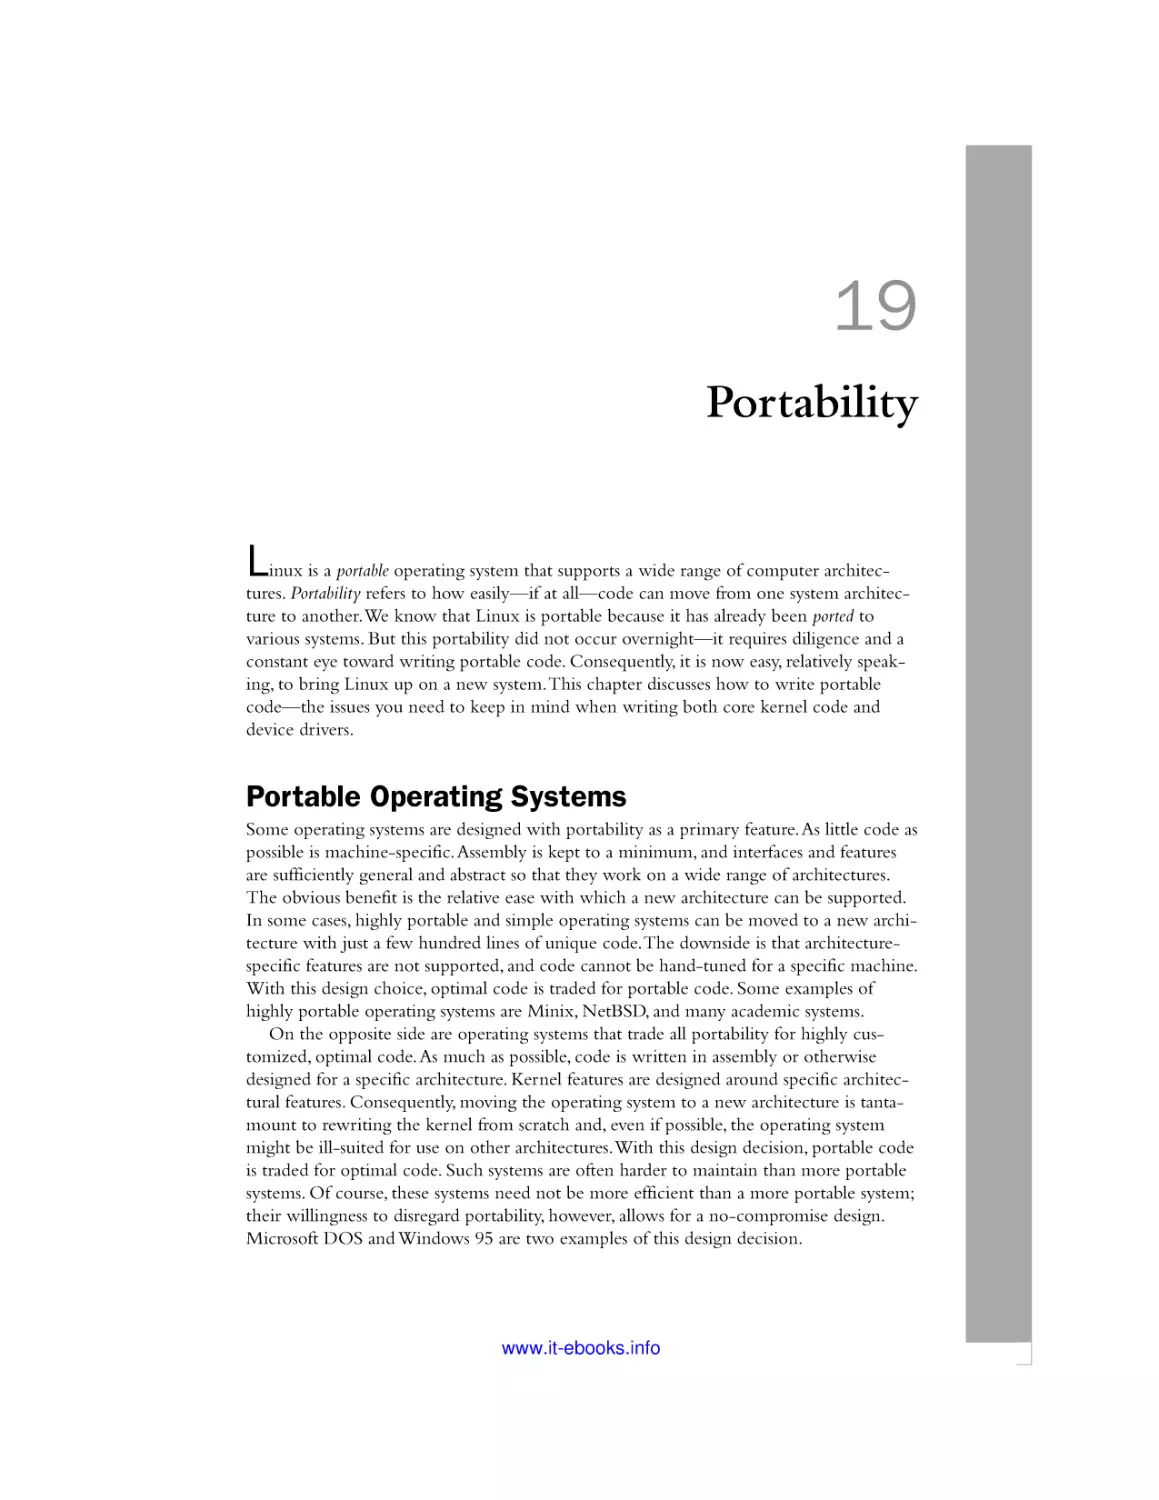 19 Portability
Portable Operating Systems